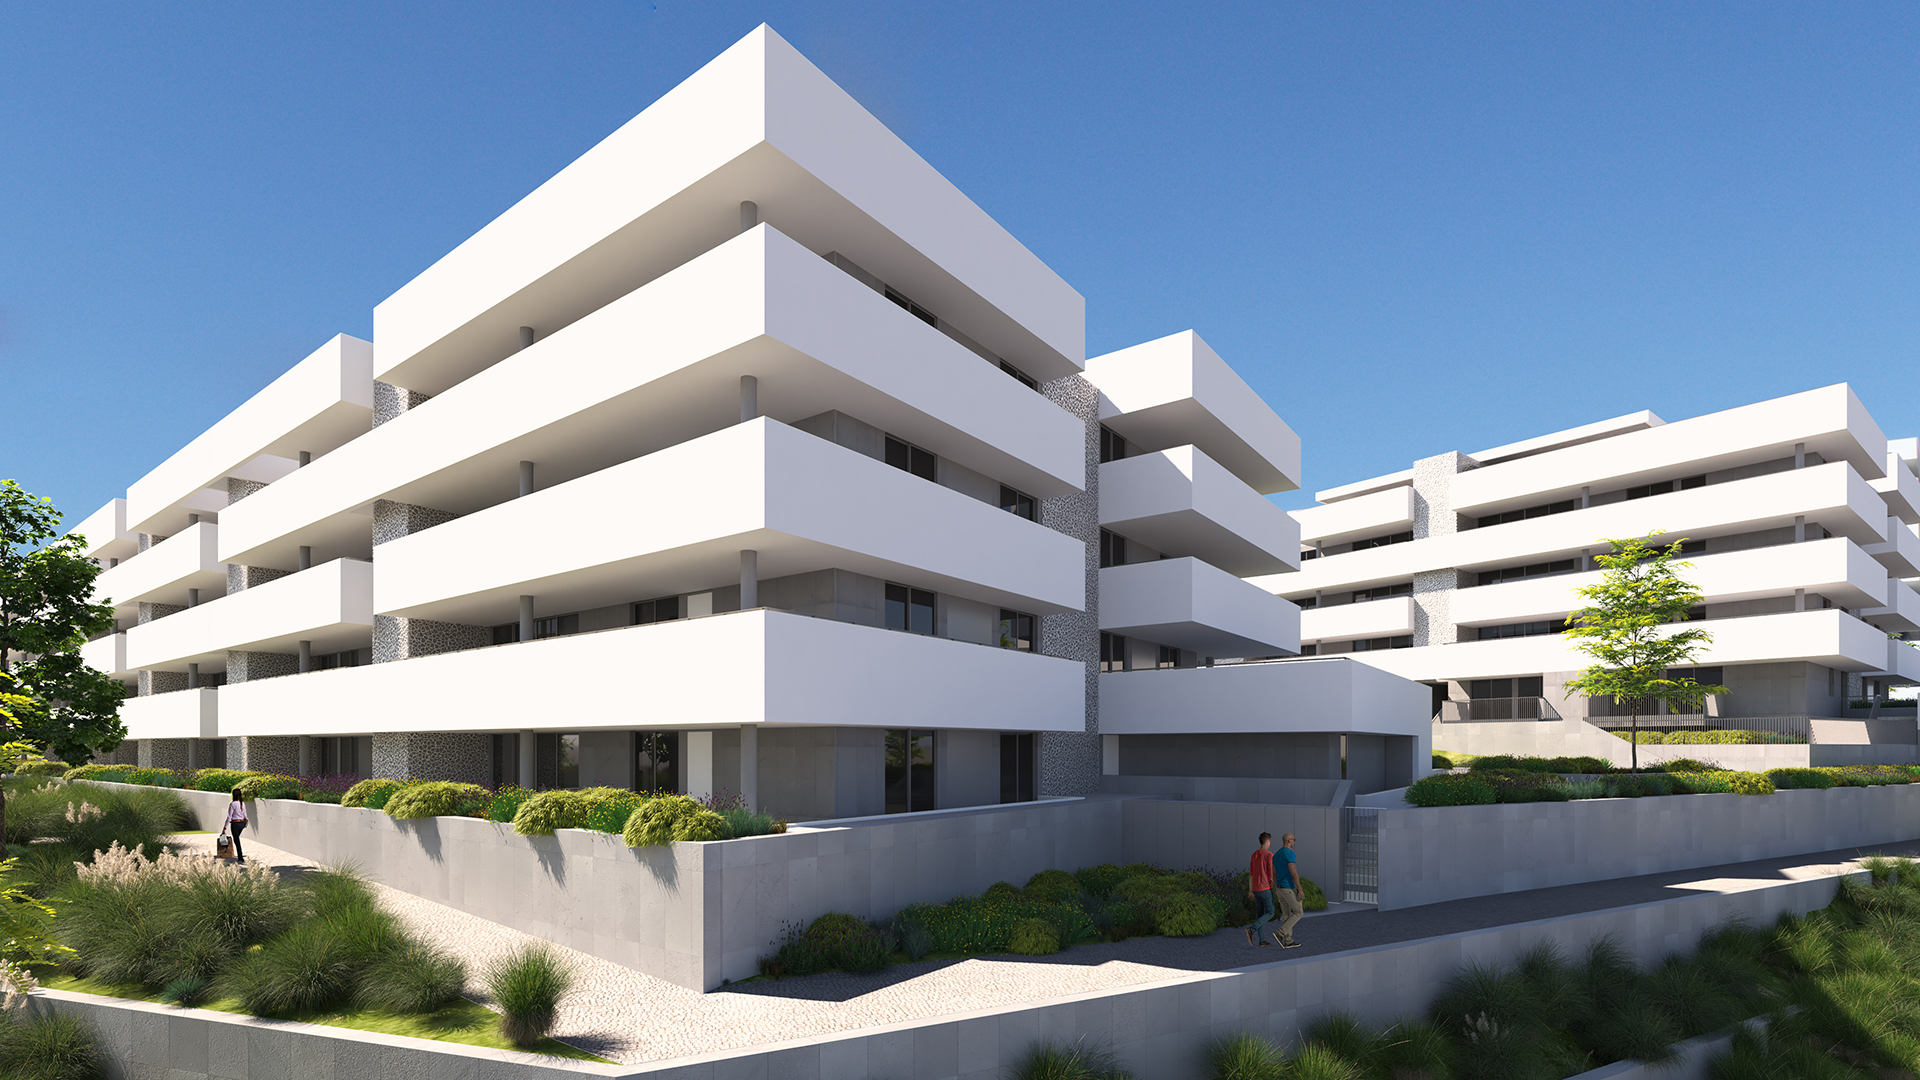 Luxury 3 Bedroom Apartments with Communal Pool and Town or Sea Views, Lagos, West Algarve  | LG1855 Fantastic luxury apartments under construction, some with sea views, only a few minutes' walk away from the historic town centre of Lagos, with its marina, beautiful beaches, and golf courses. Owners will have access to a communal pool and spa area. 